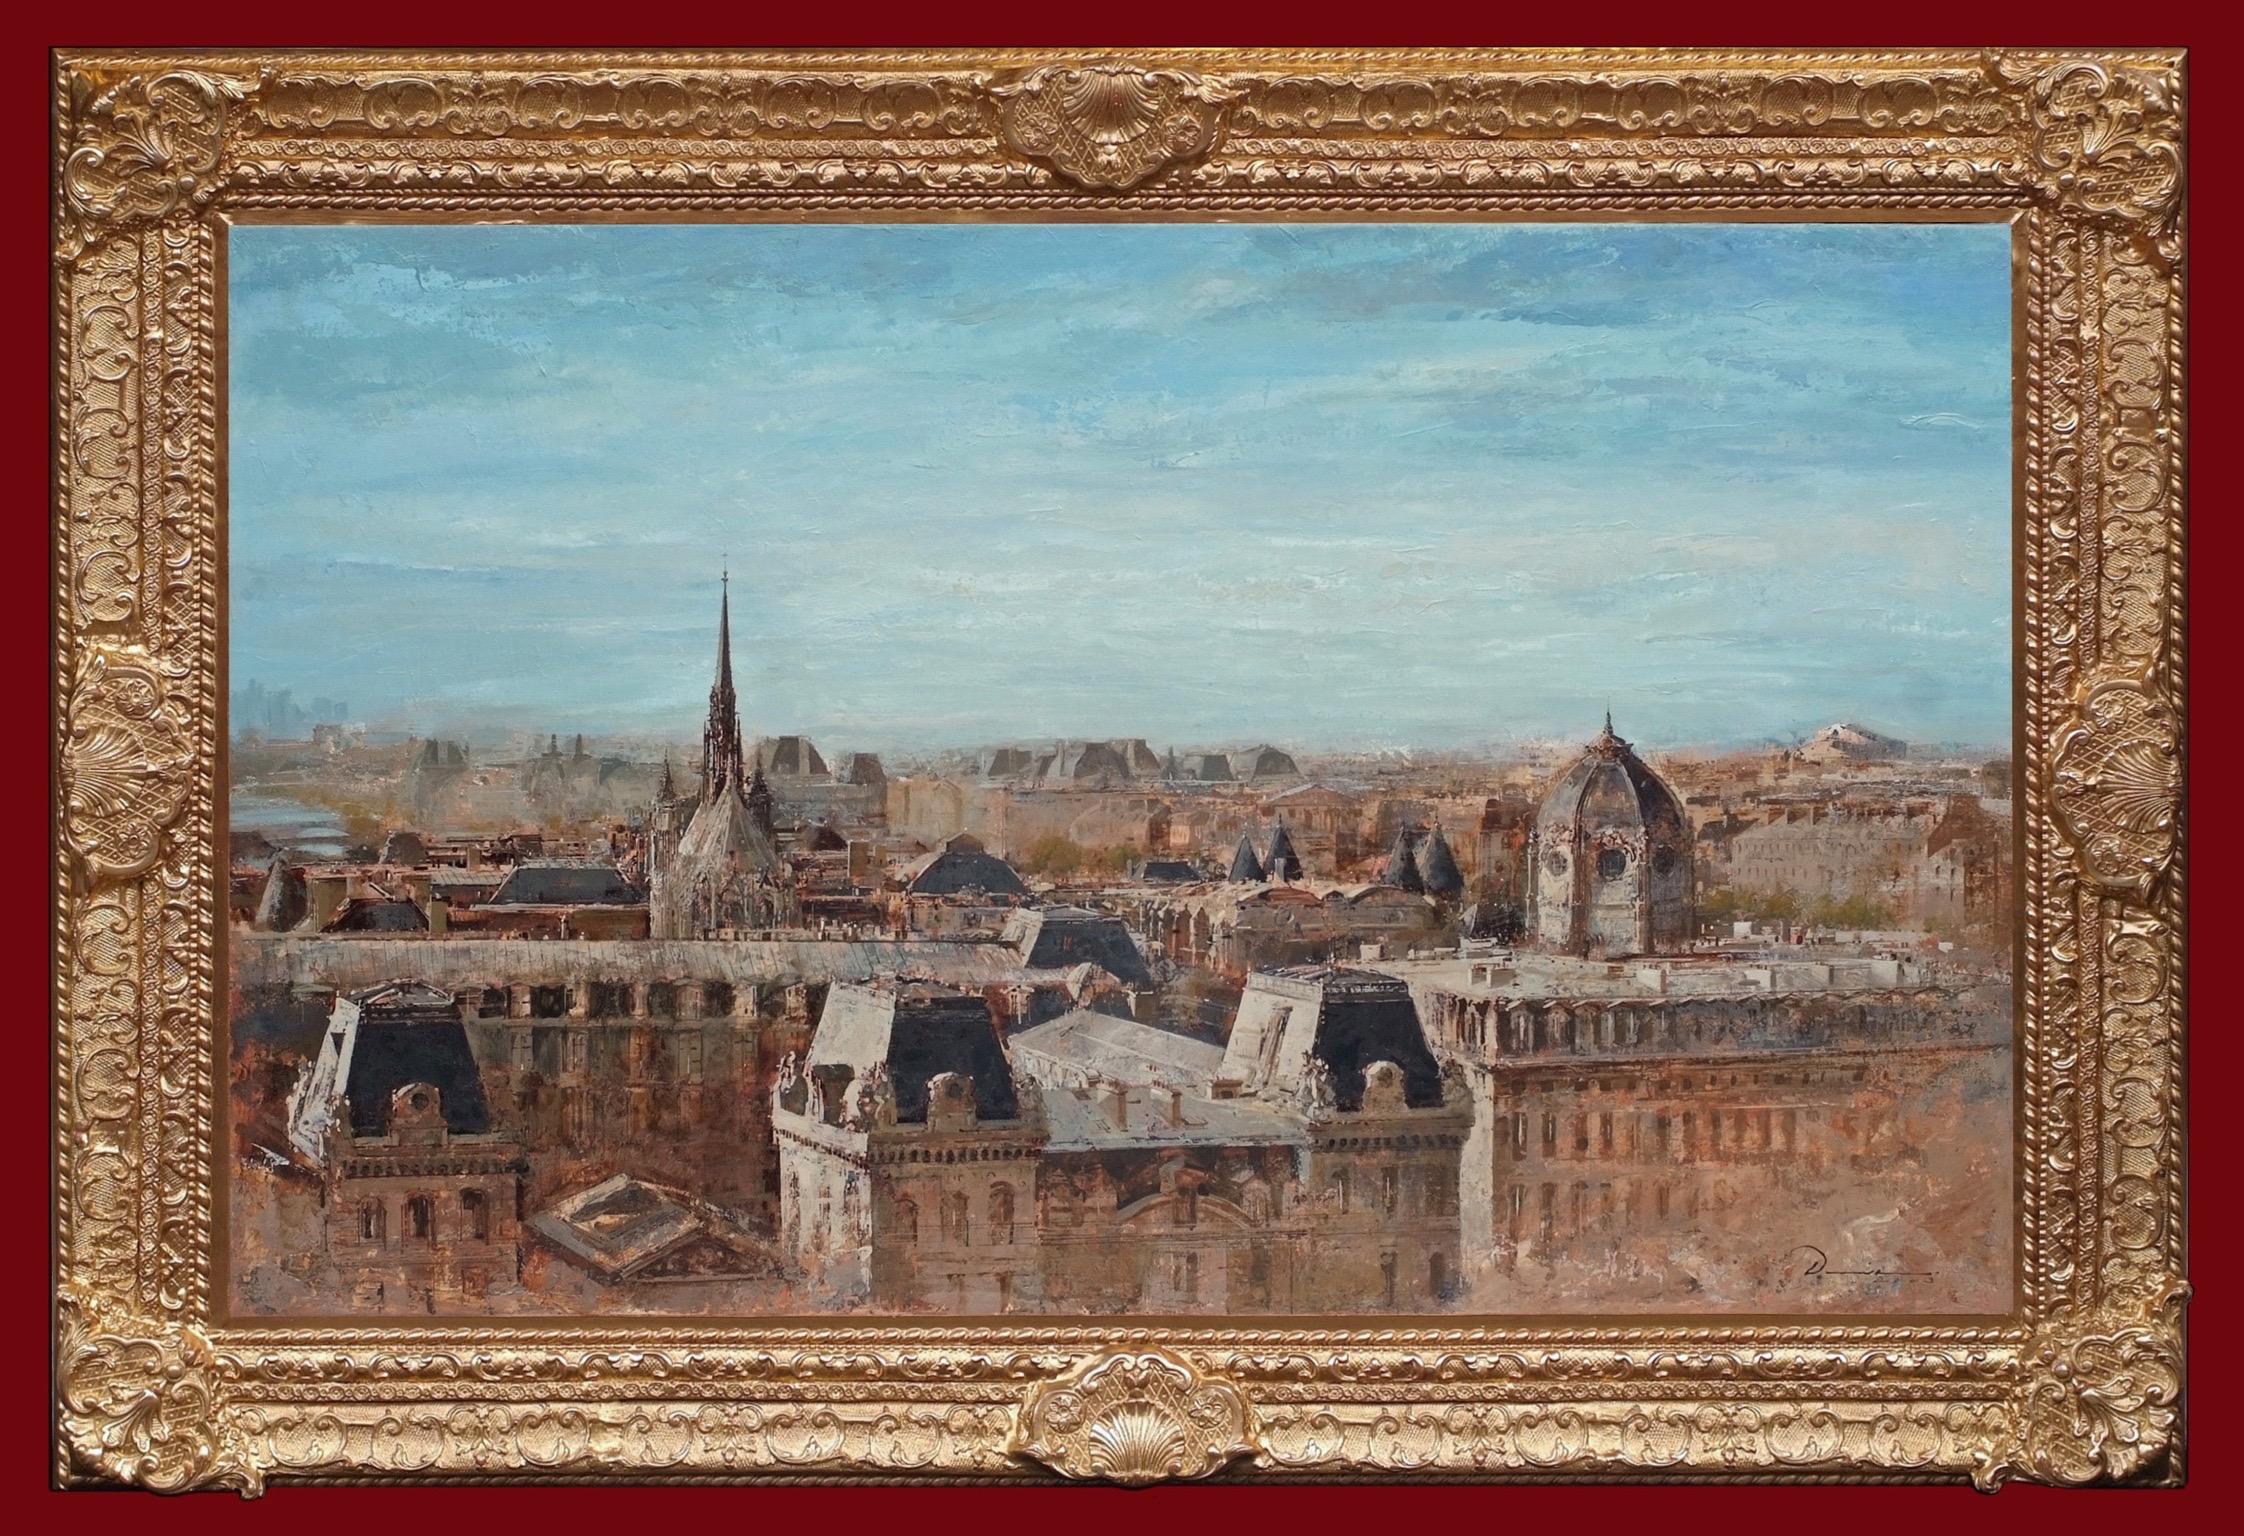 David LEUNG Landscape Painting - View of Paris Above The Rooftops - Original Painting